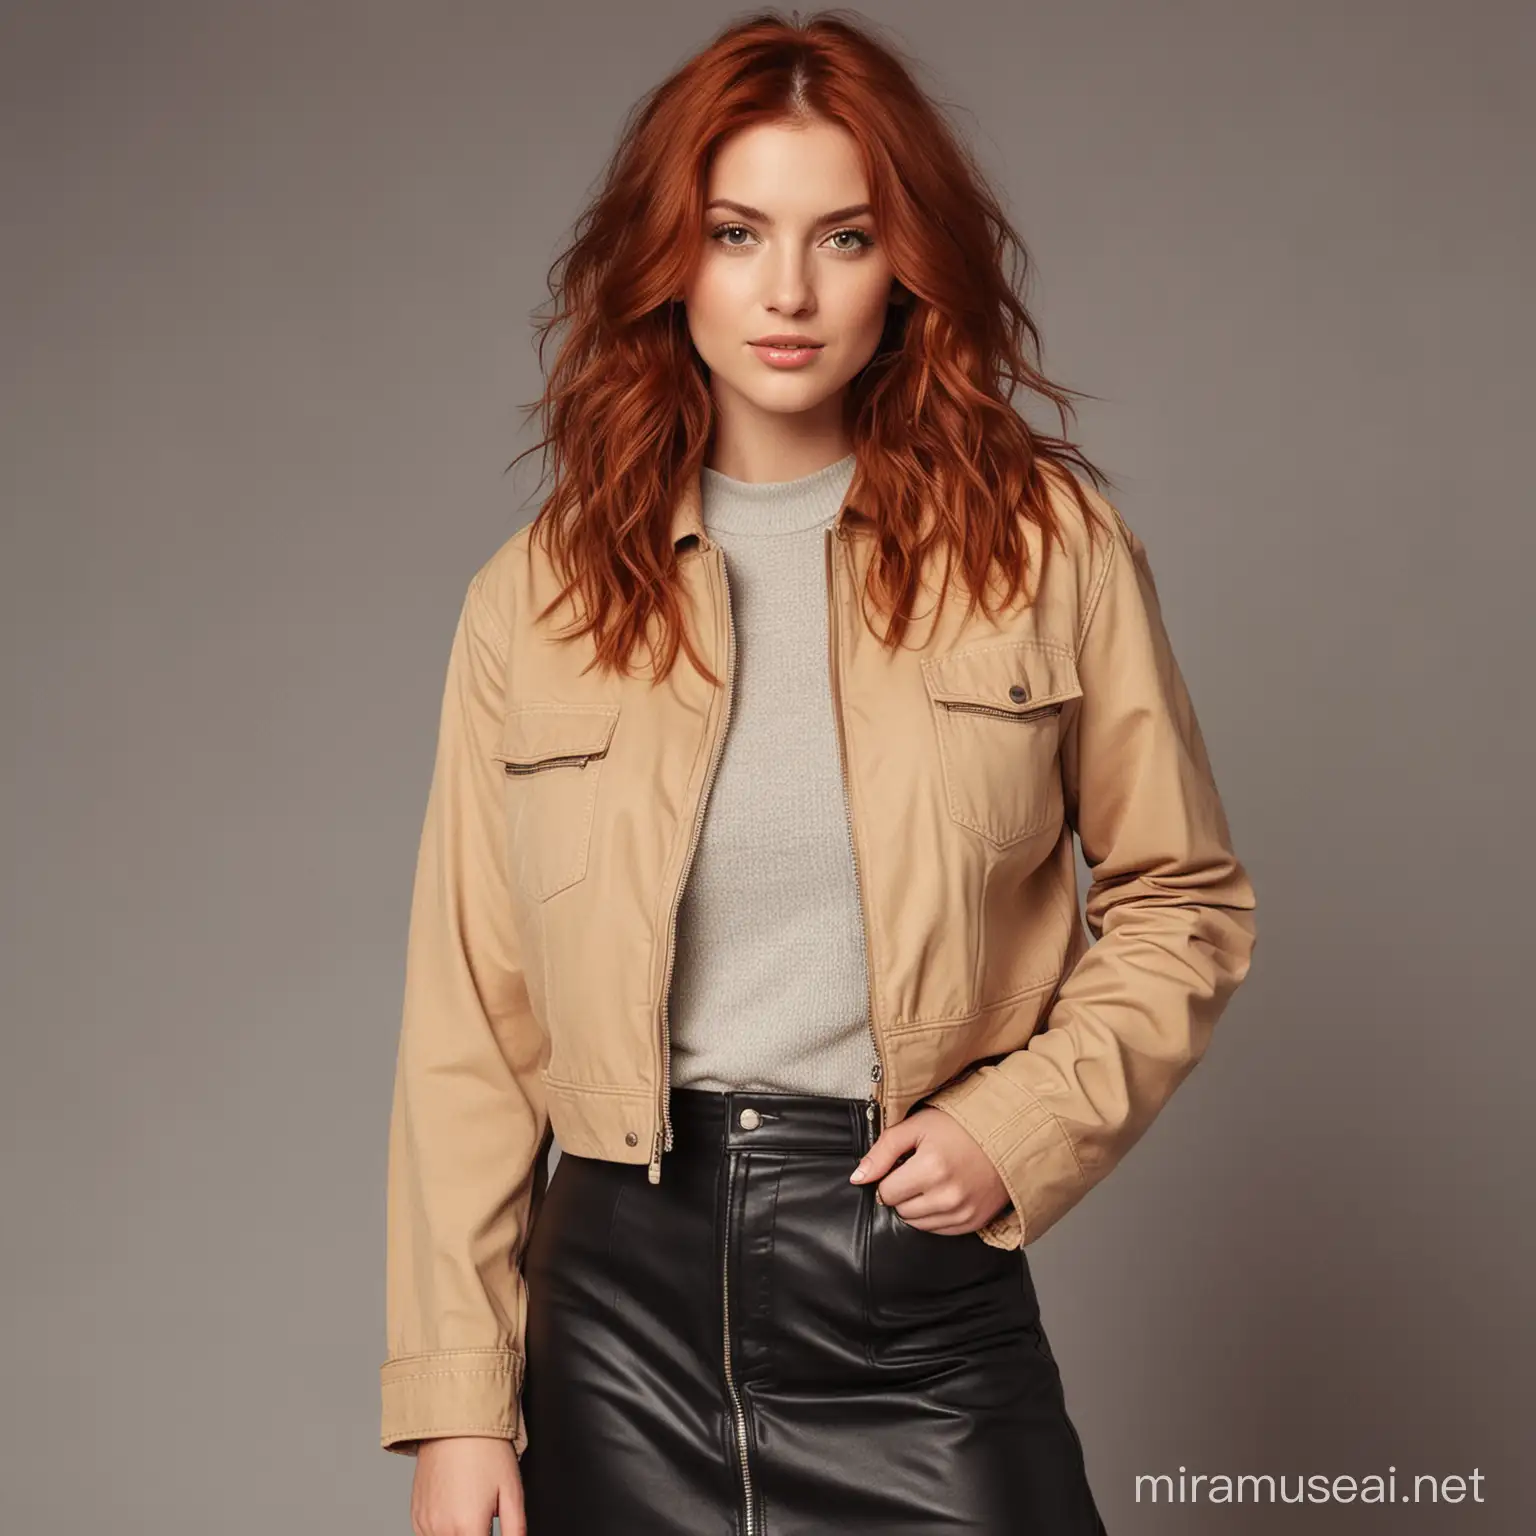 A woman in her 20s with red hair that falls in loose waves, hazel eyes, dressed in a cropped jacket zipped up. brown a line skirt. big boots. 

